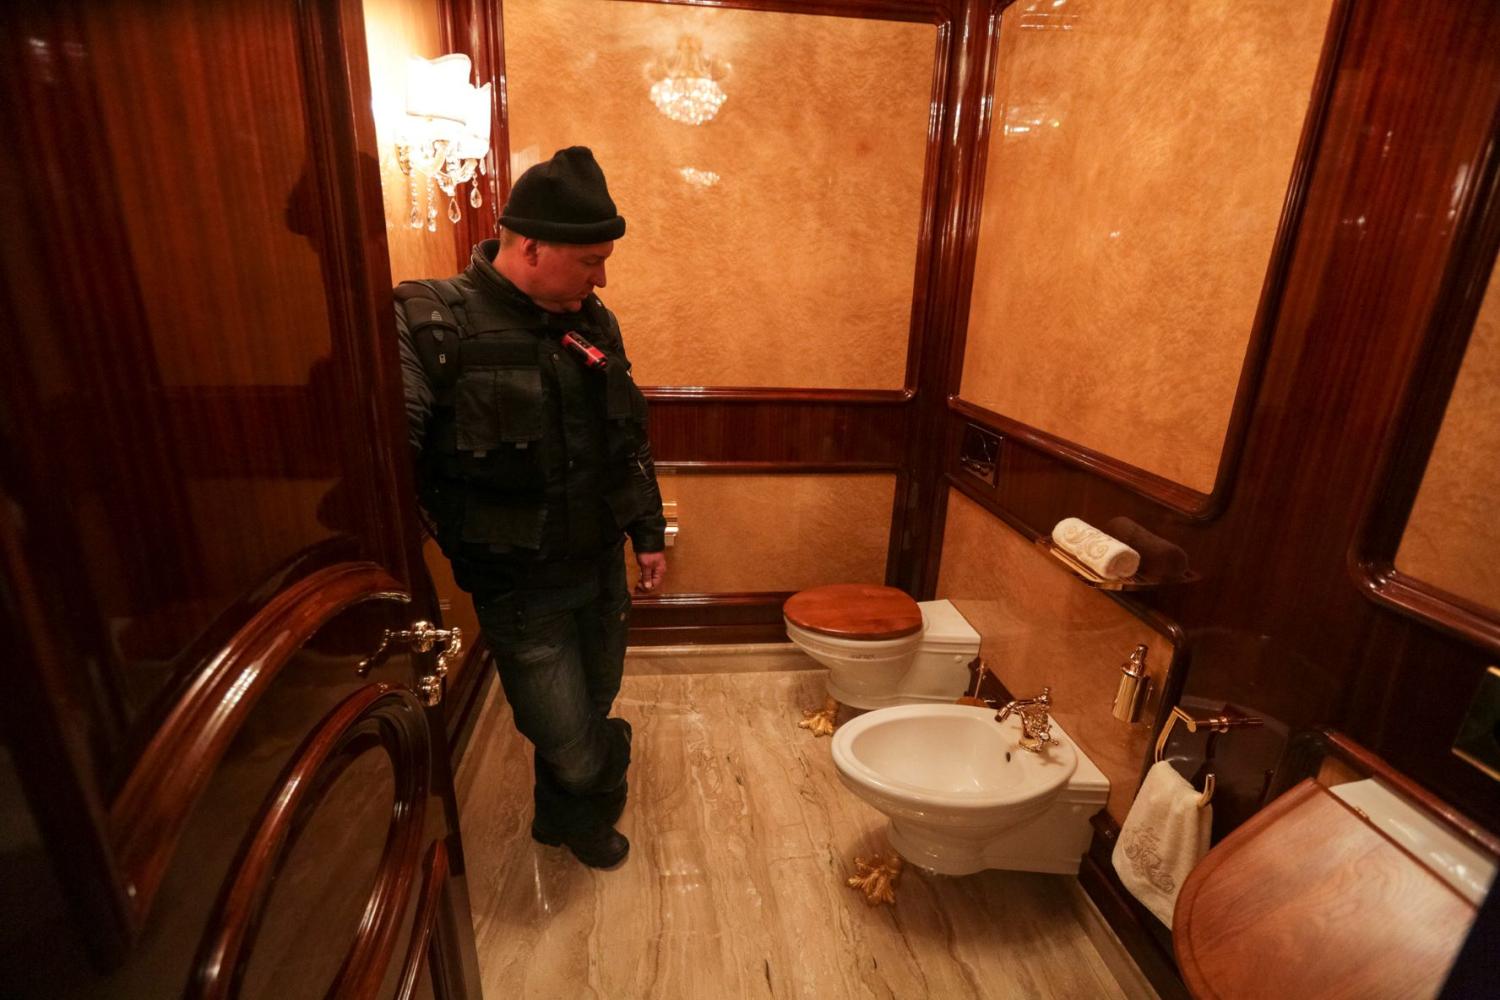 A man stands inside a lavatory as anti-government protesters and journalists walk on the grounds of the Mezhyhirya residence of Ukraine's President Viktor Yanukovych in the village Novi Petrivtsi, outside Kyiv February 22, 2014.